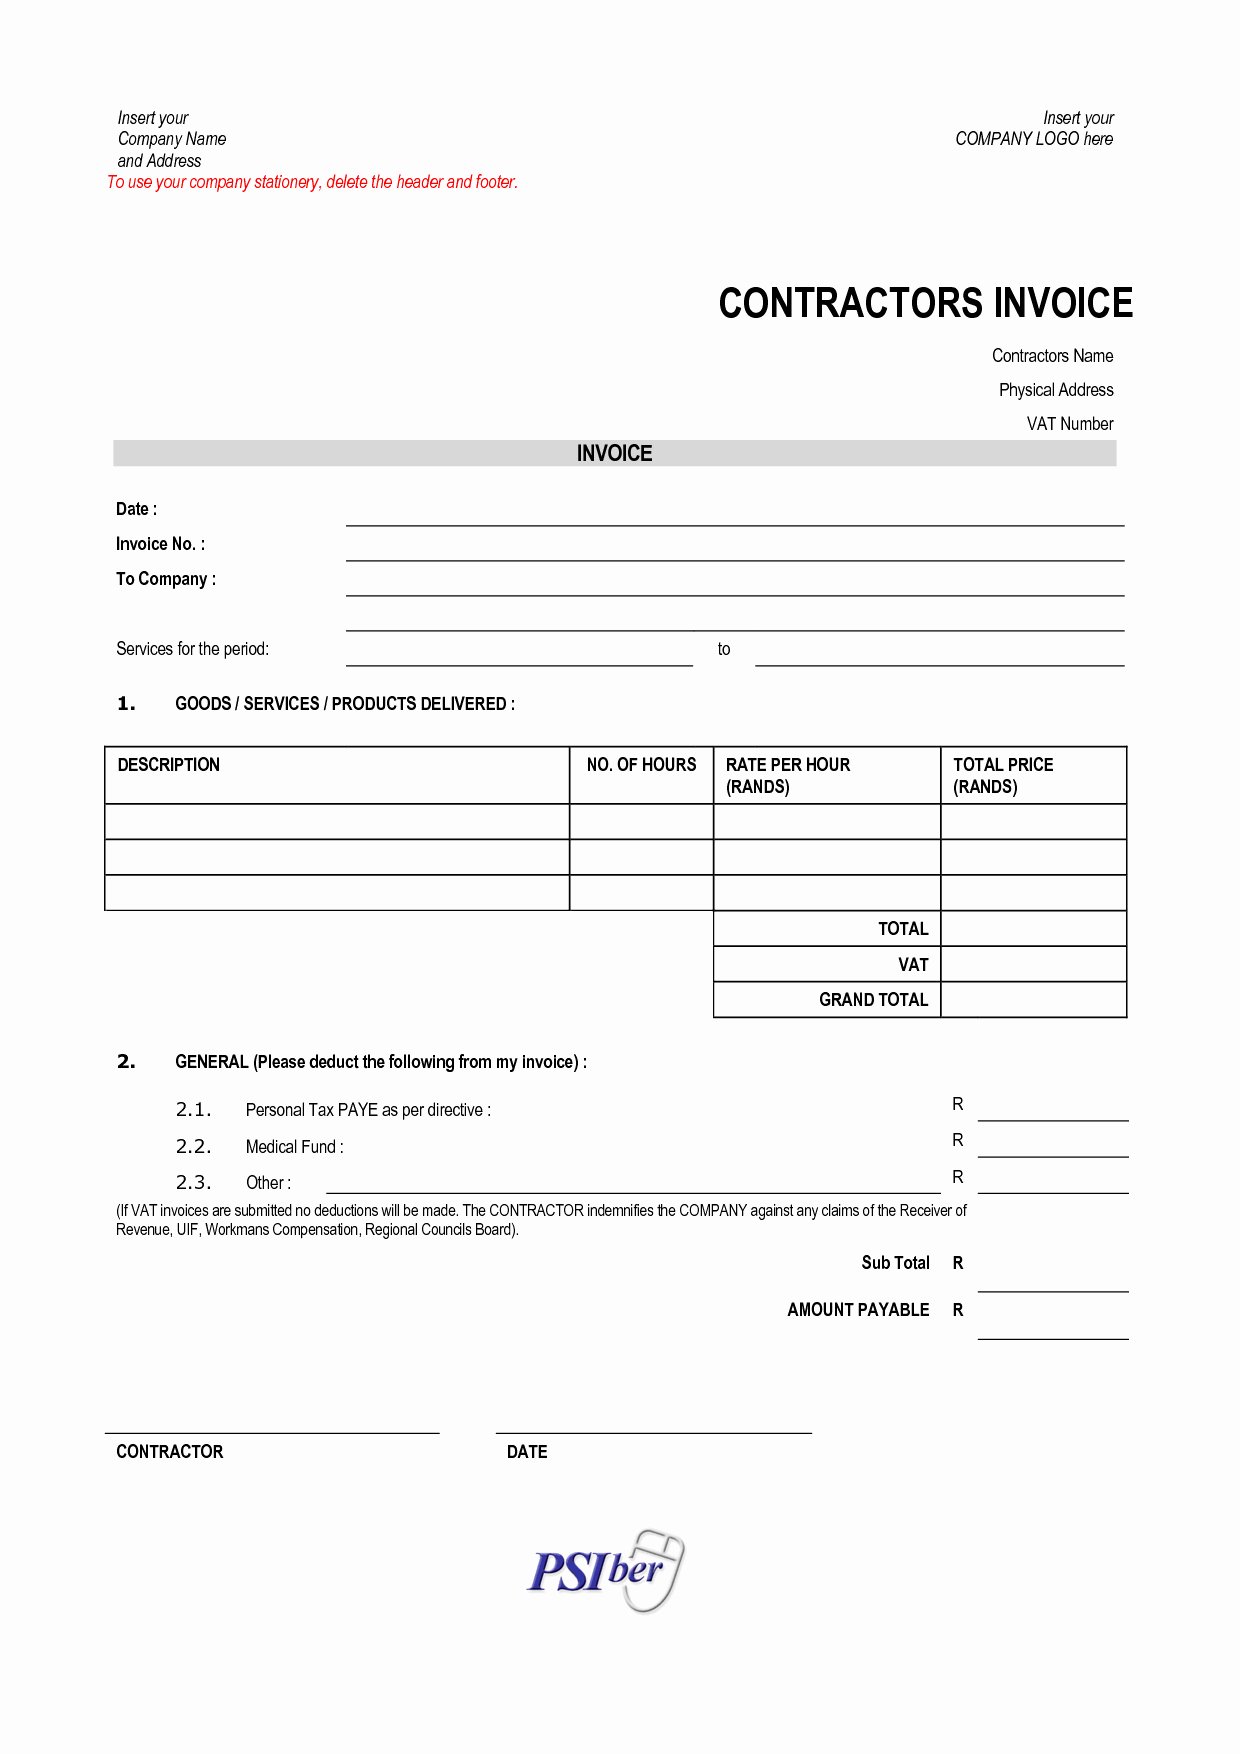 Invoice Template for Contract Work Fresh Invoice Template for Contractor Excel Contract Work